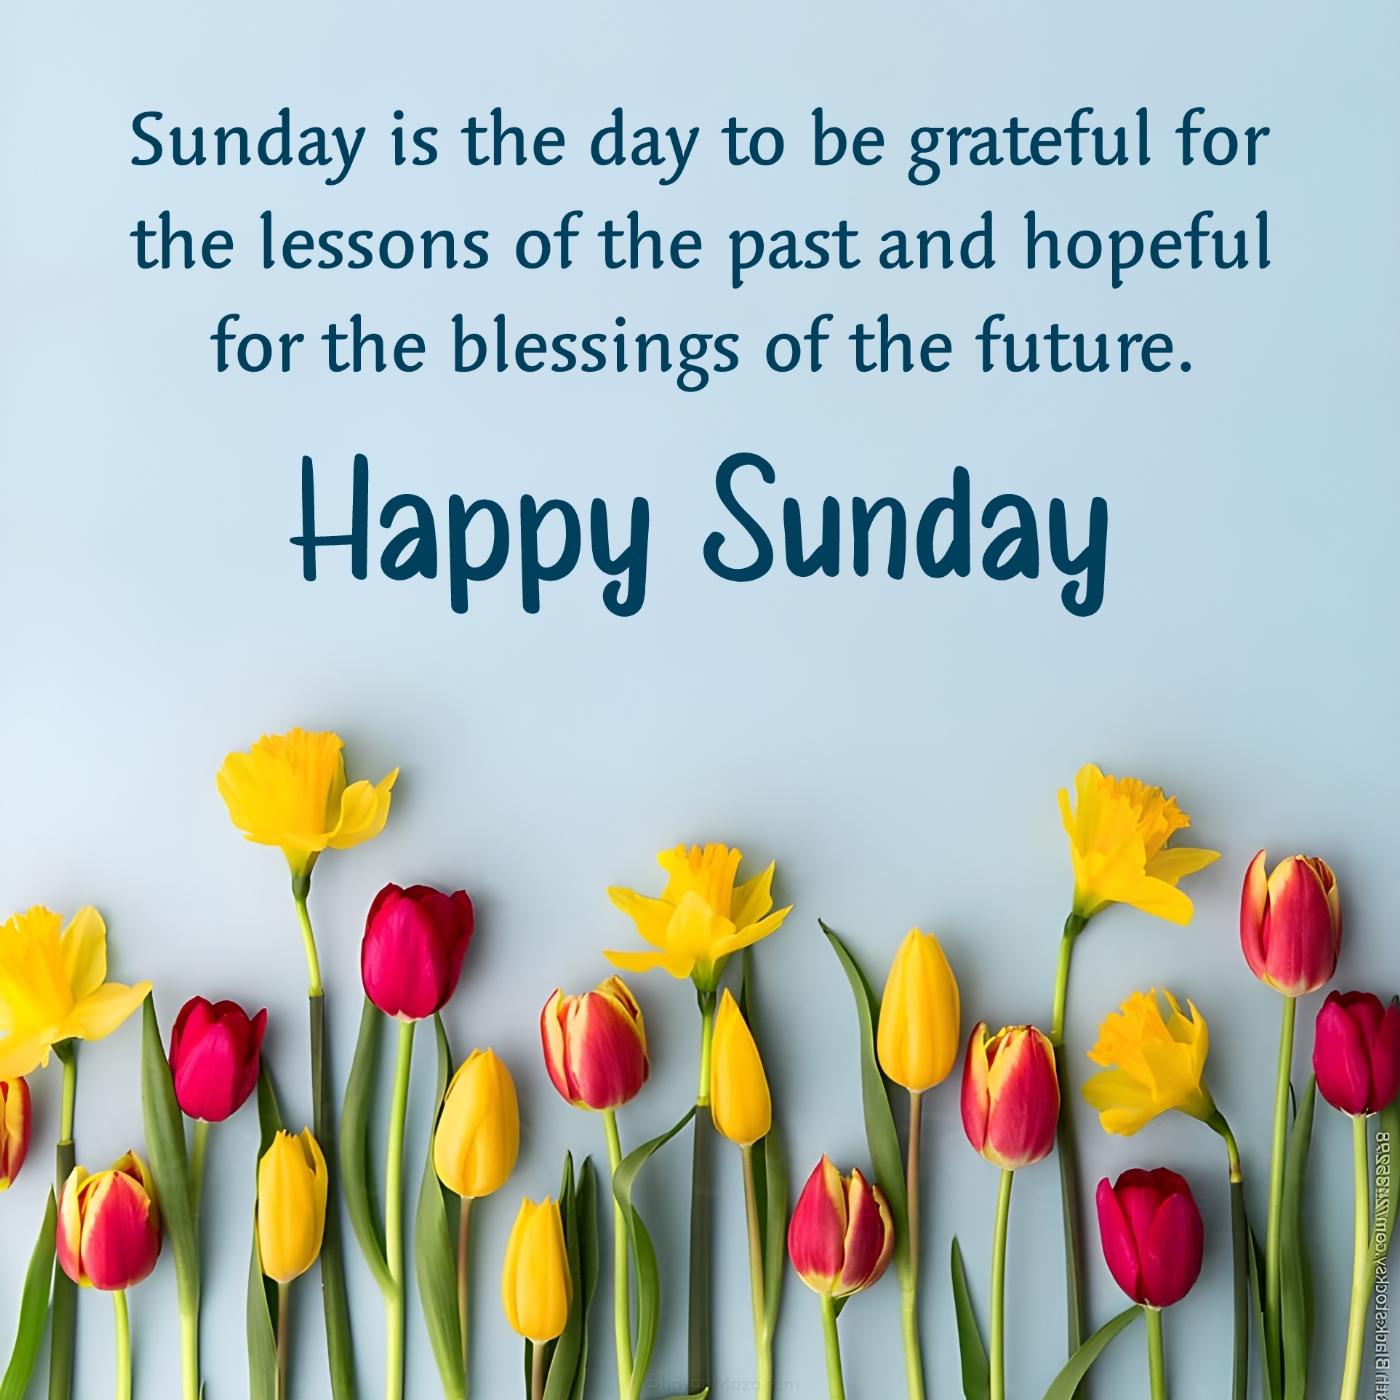 Sunday is the day to be grateful for the lessons of the past